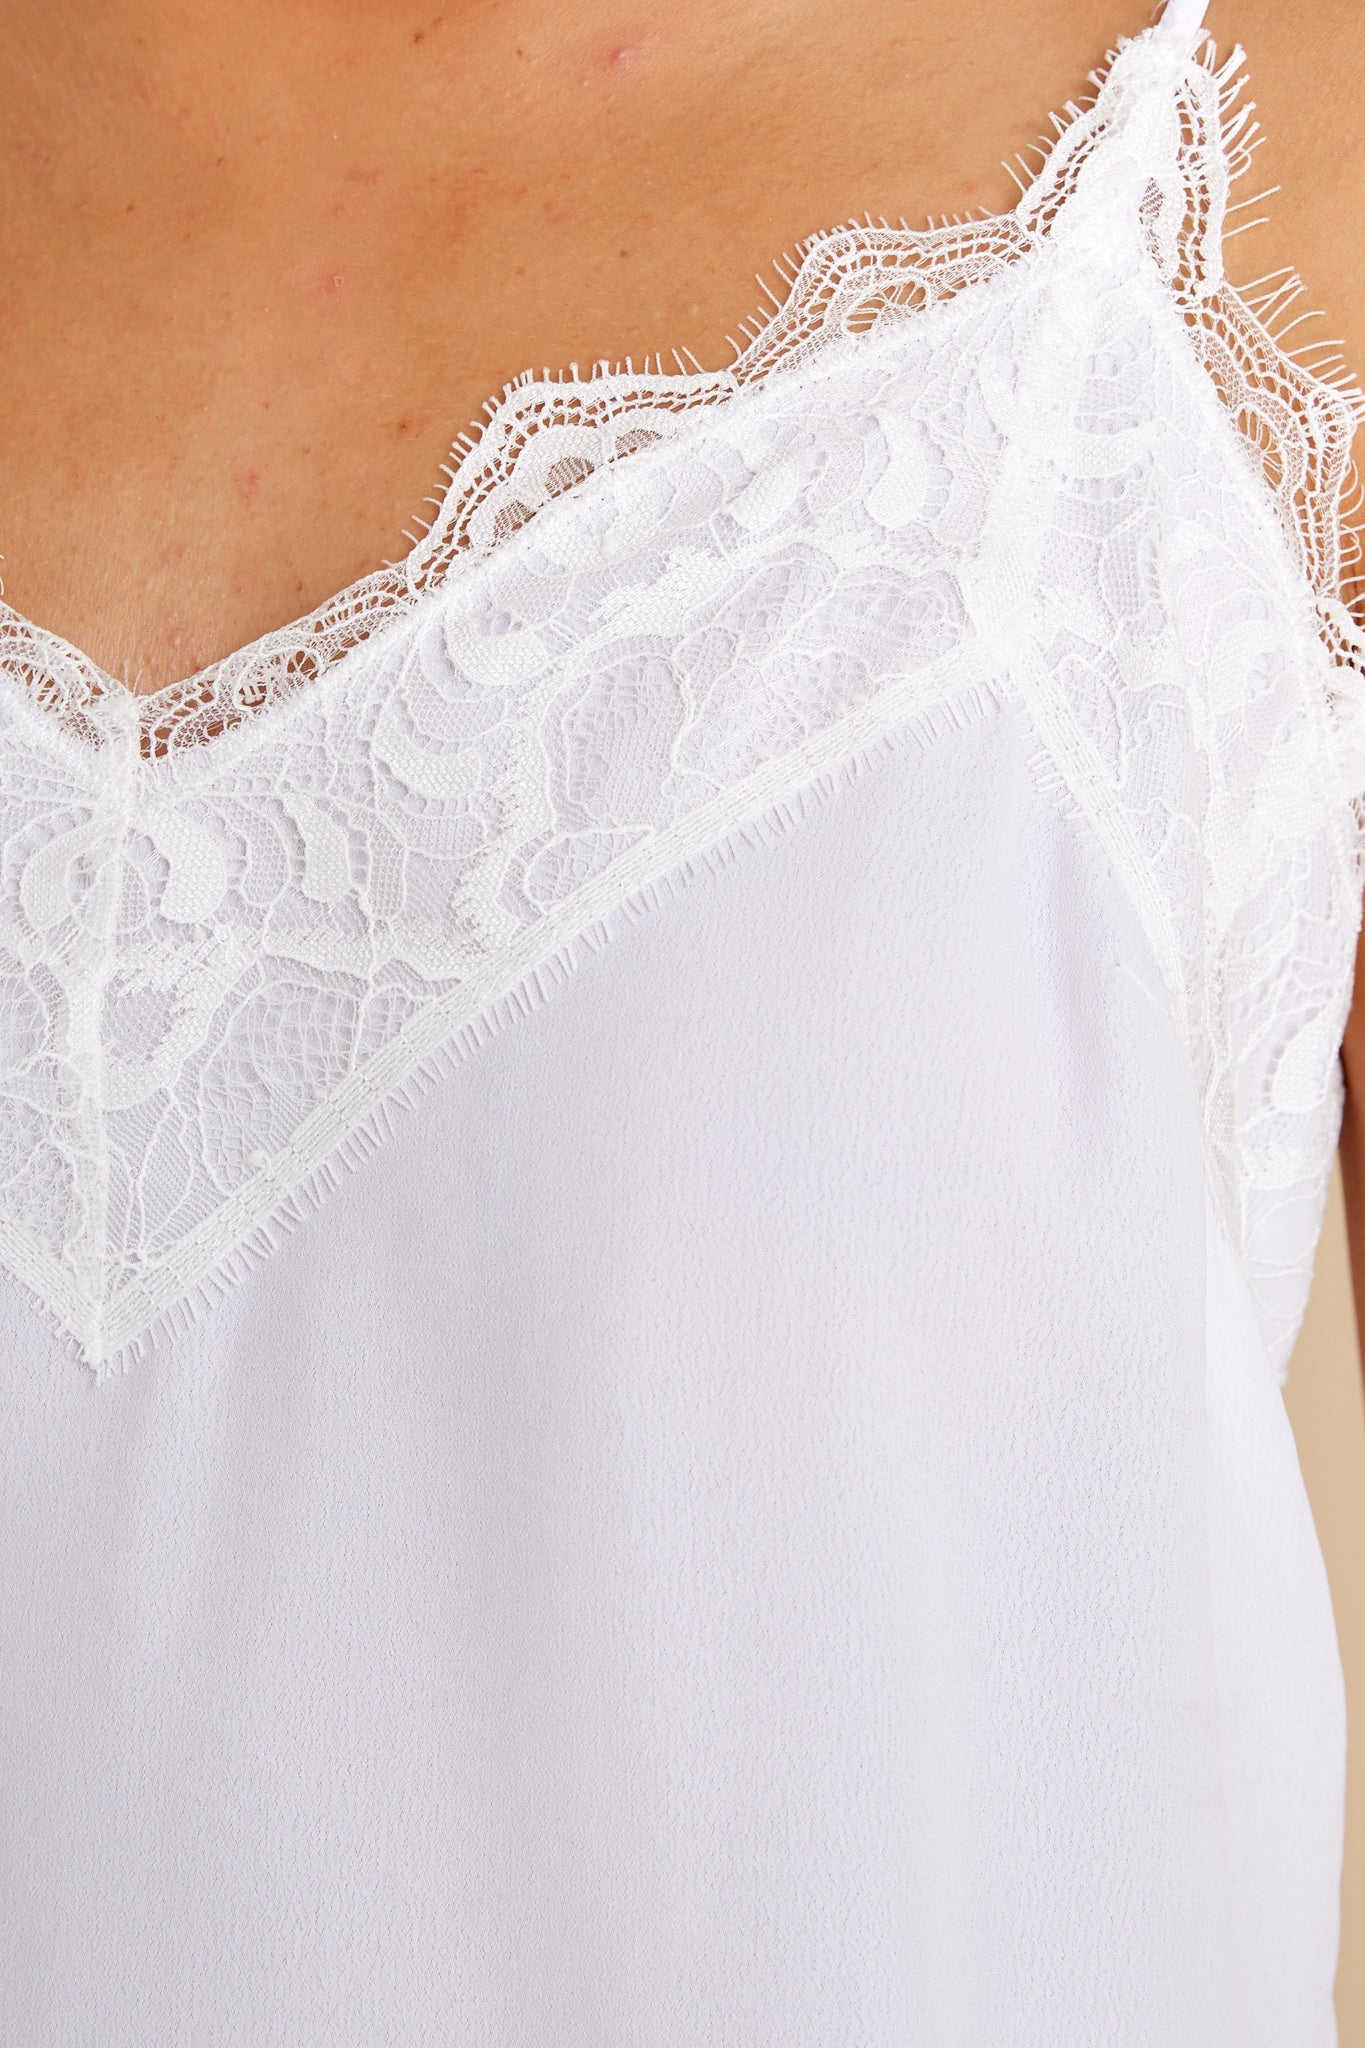 Covered In Grace White Lace Top - Red Dress